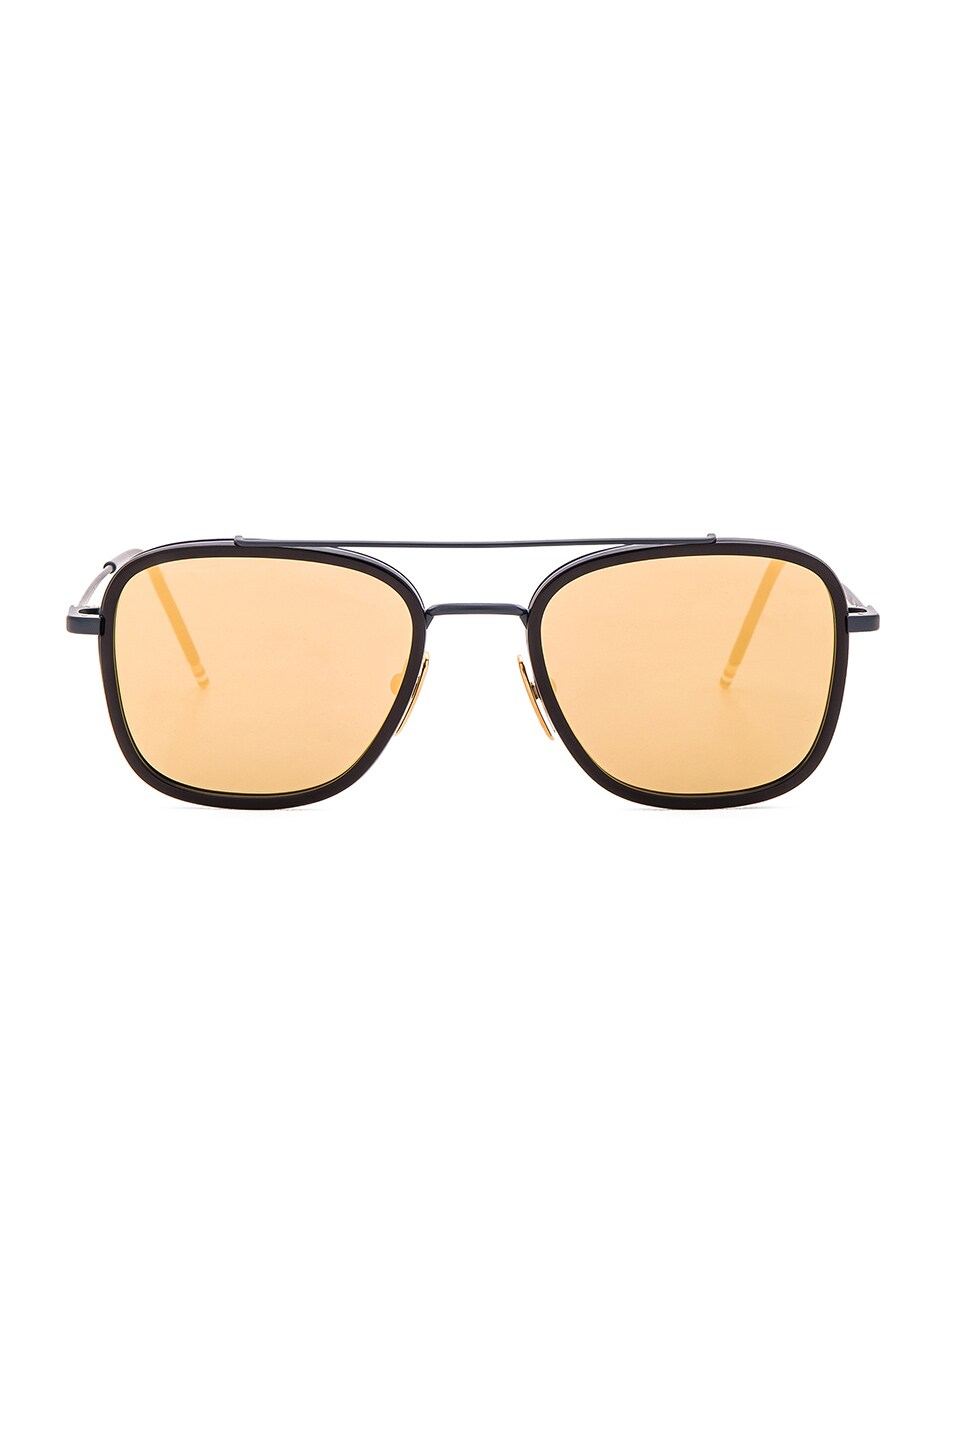 Image 1 of Thom Browne Square Sunglasses in Navy & Gold